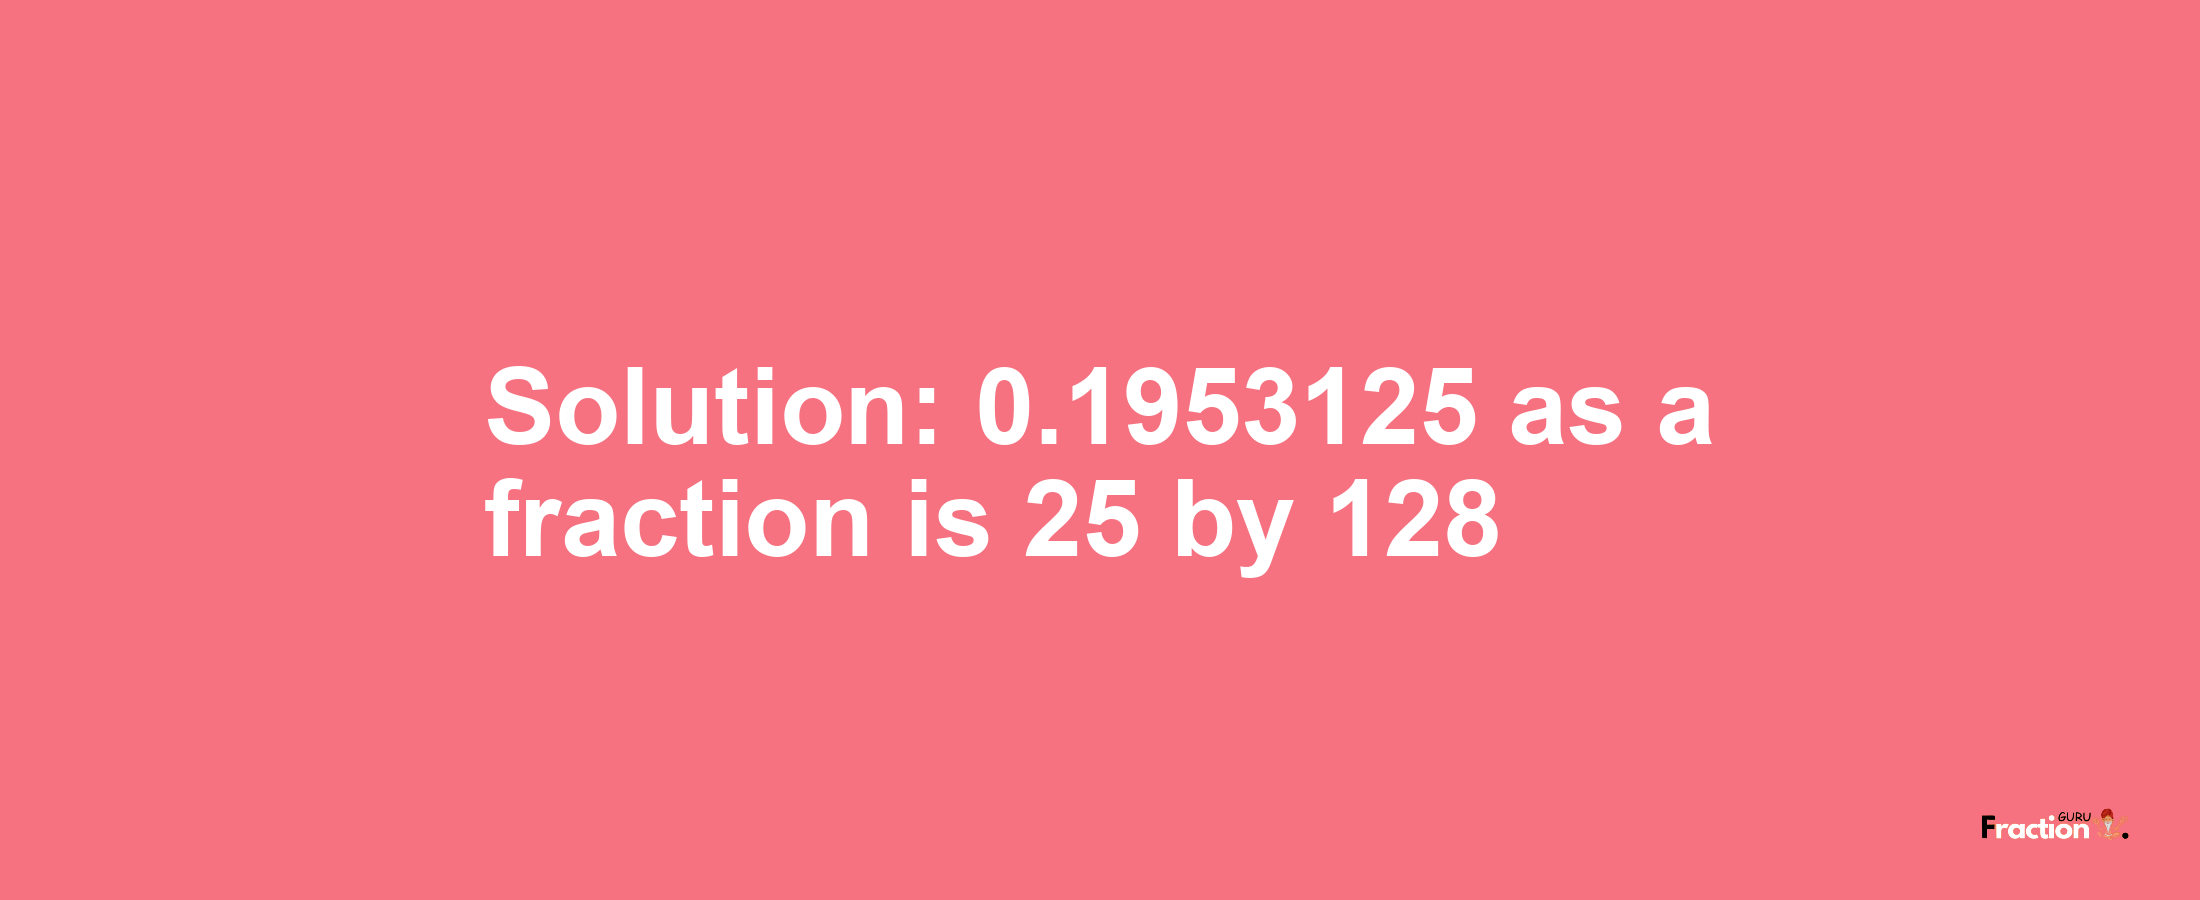 Solution:0.1953125 as a fraction is 25/128